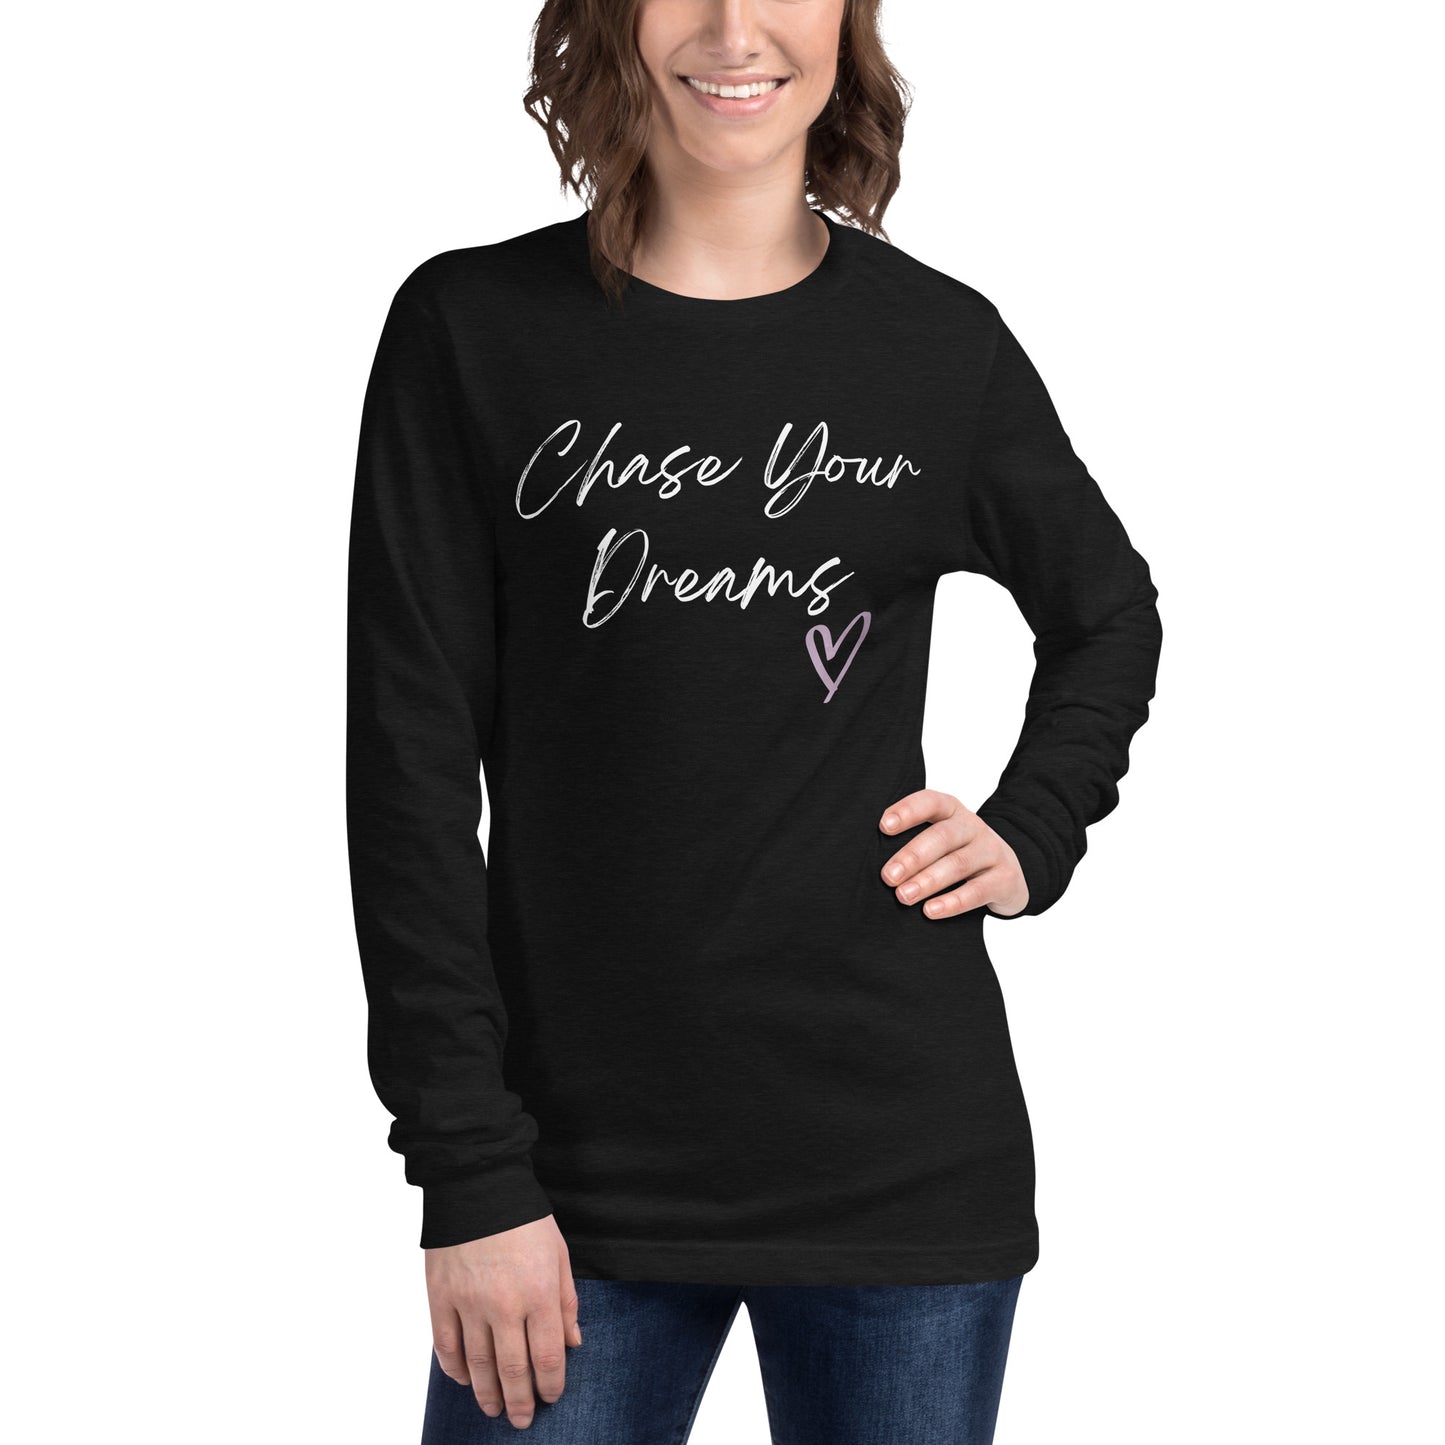 Chase Your Dreams Long Sleeve Tee